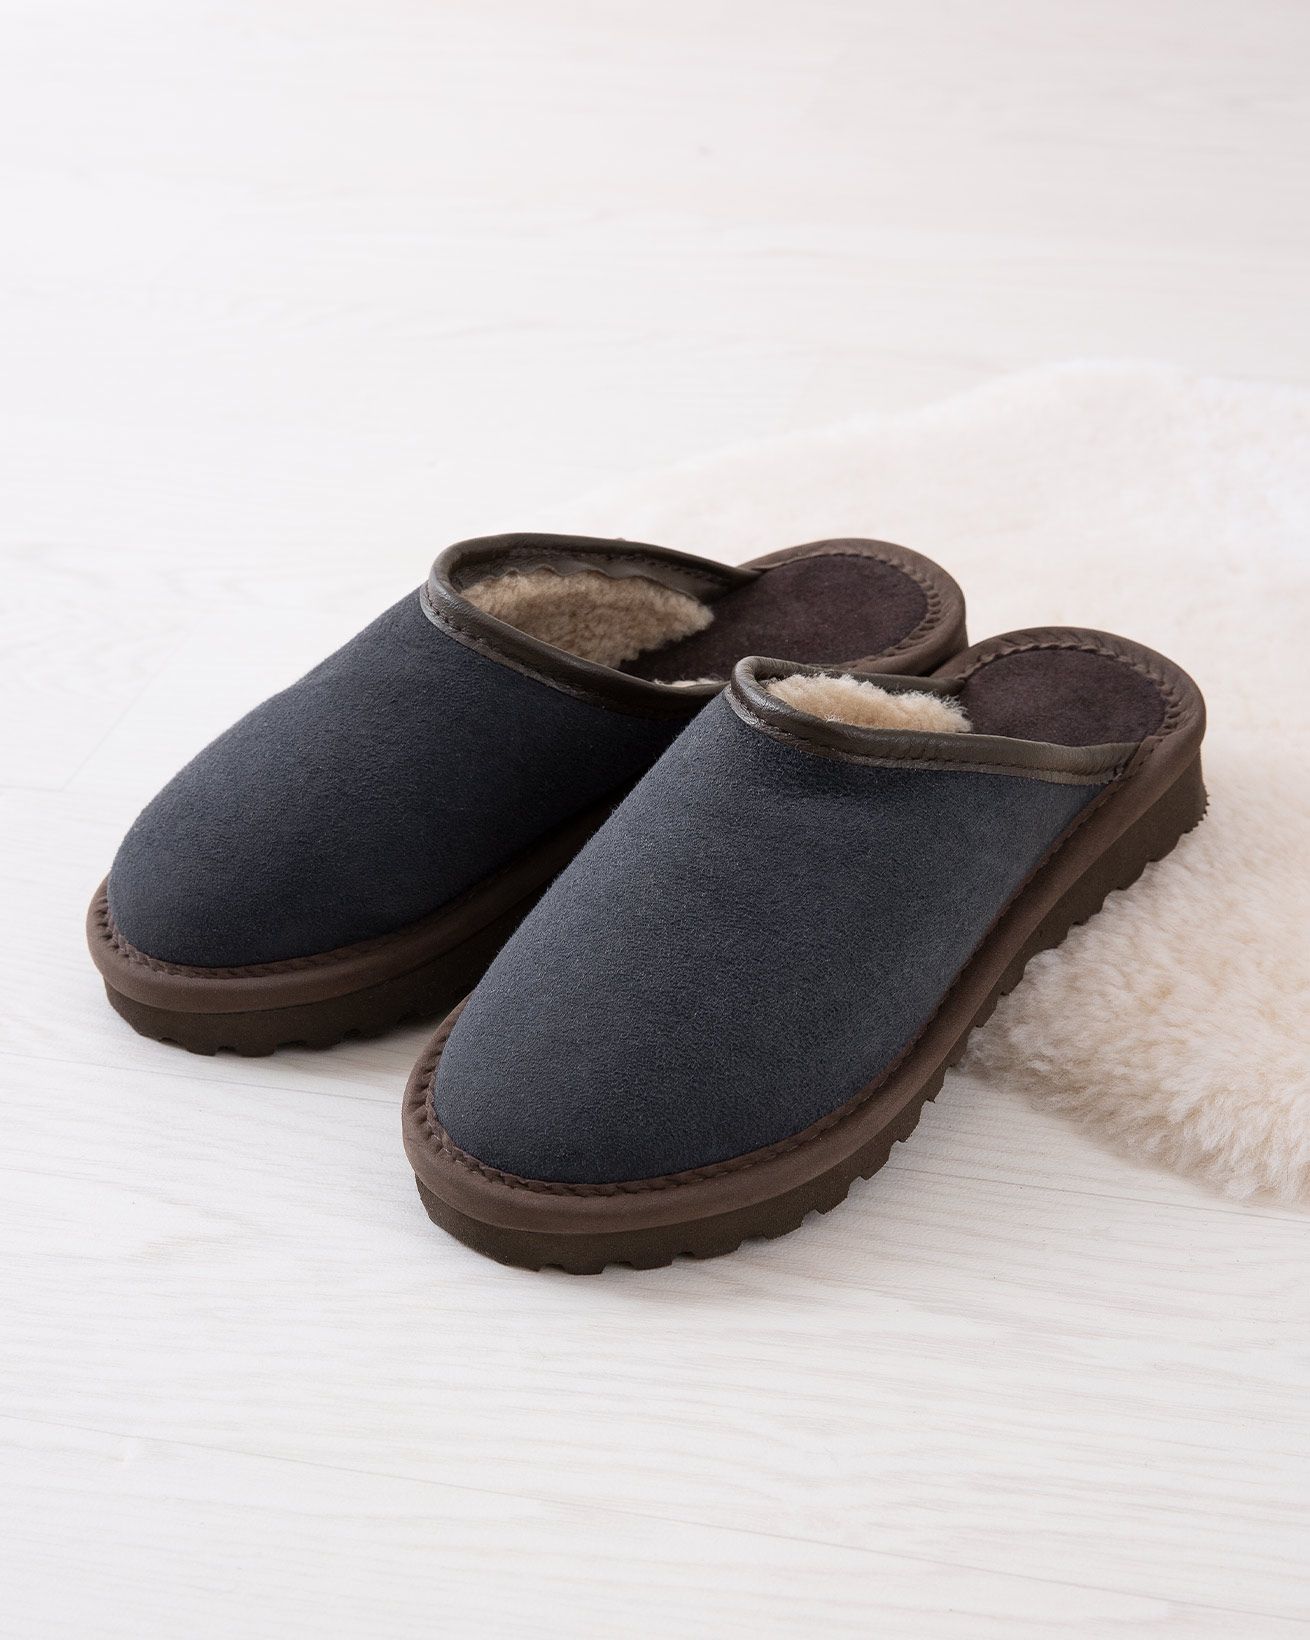 Ladies' Clogs (backless)